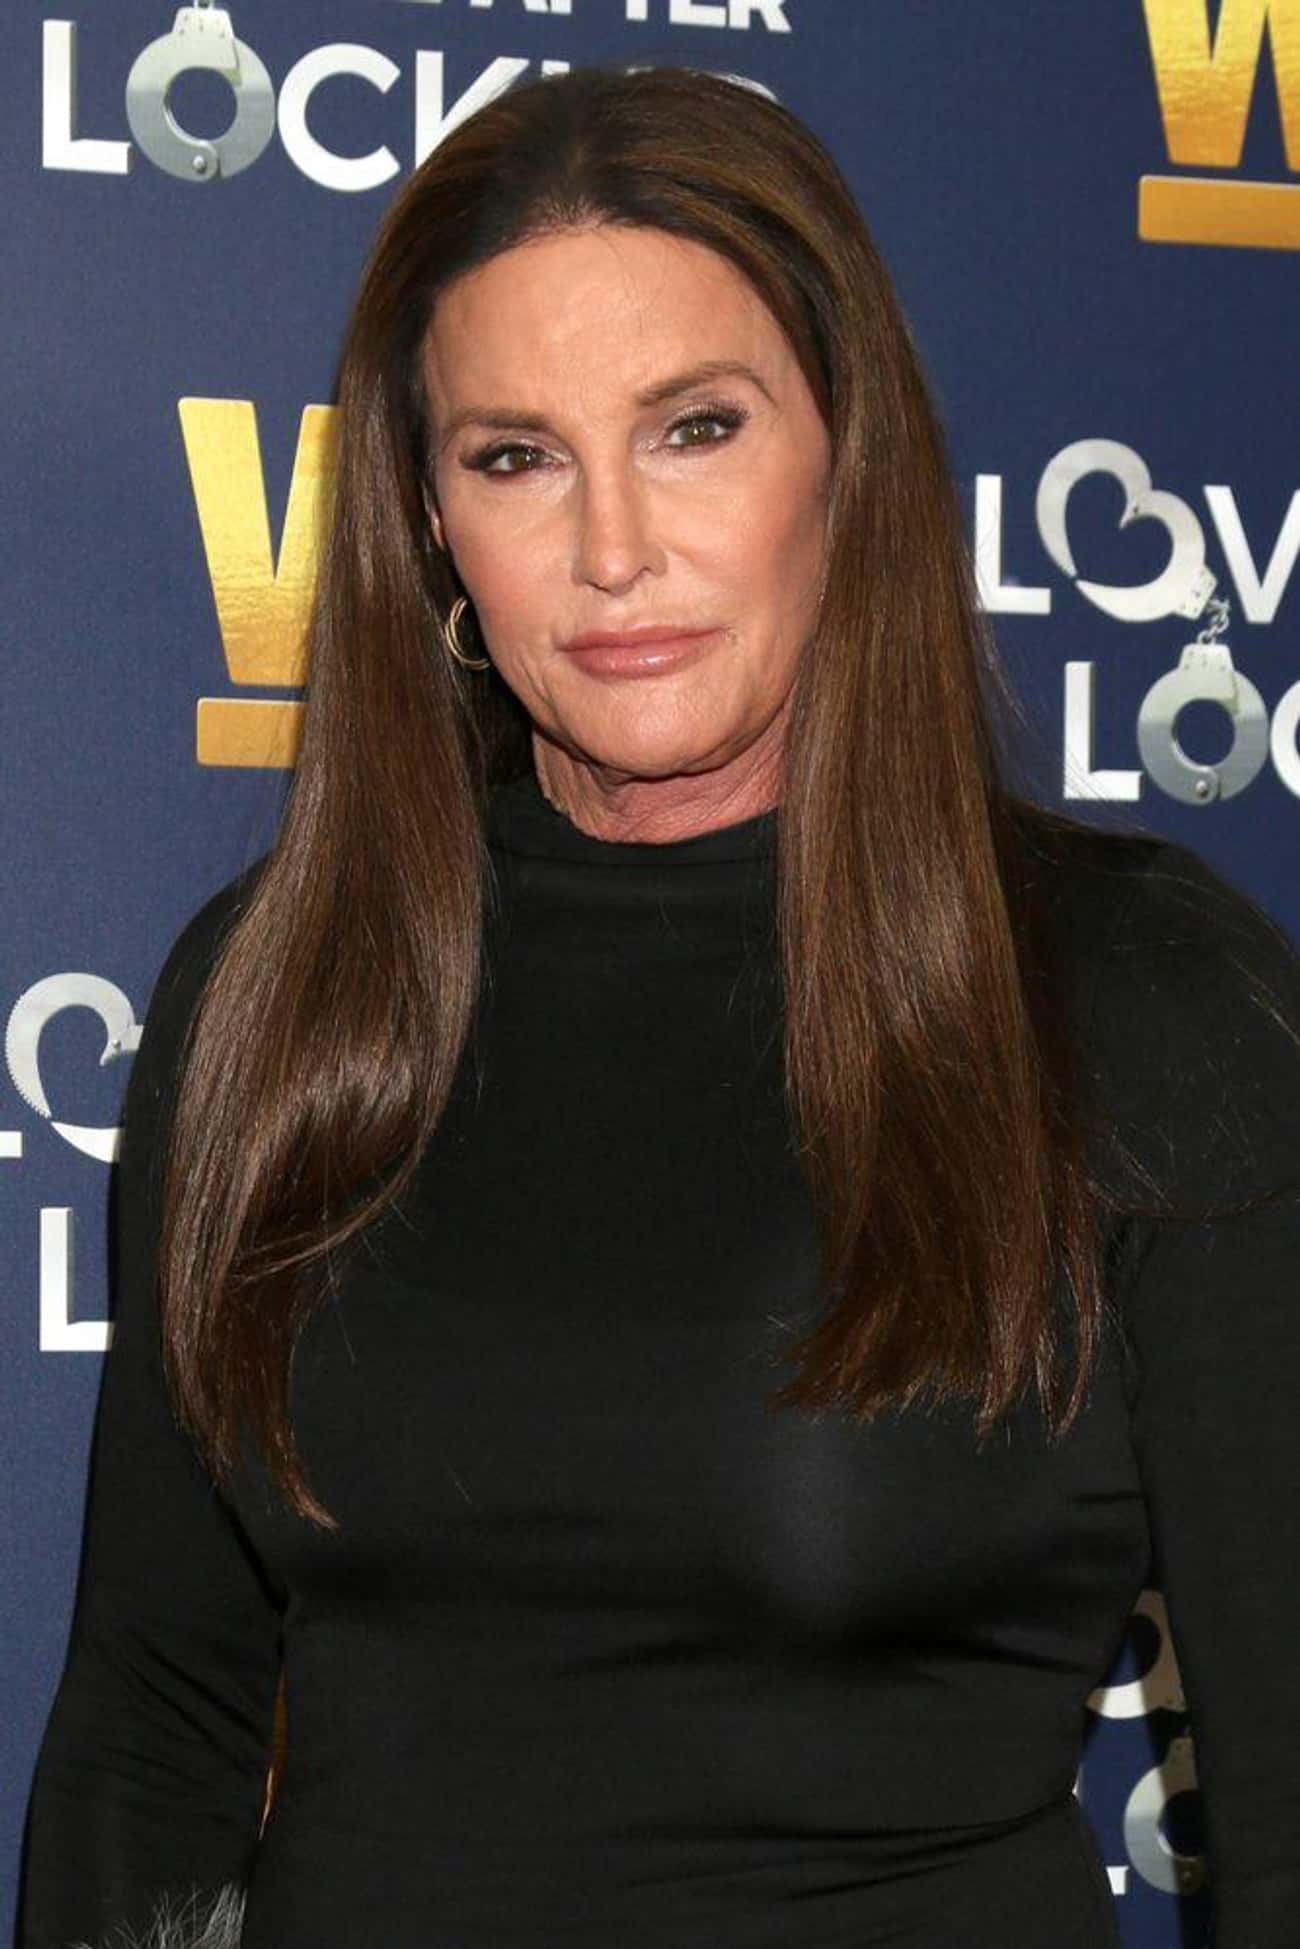 Caitlyn Jenner Alienated Her Family And The LGBTQ+ Community